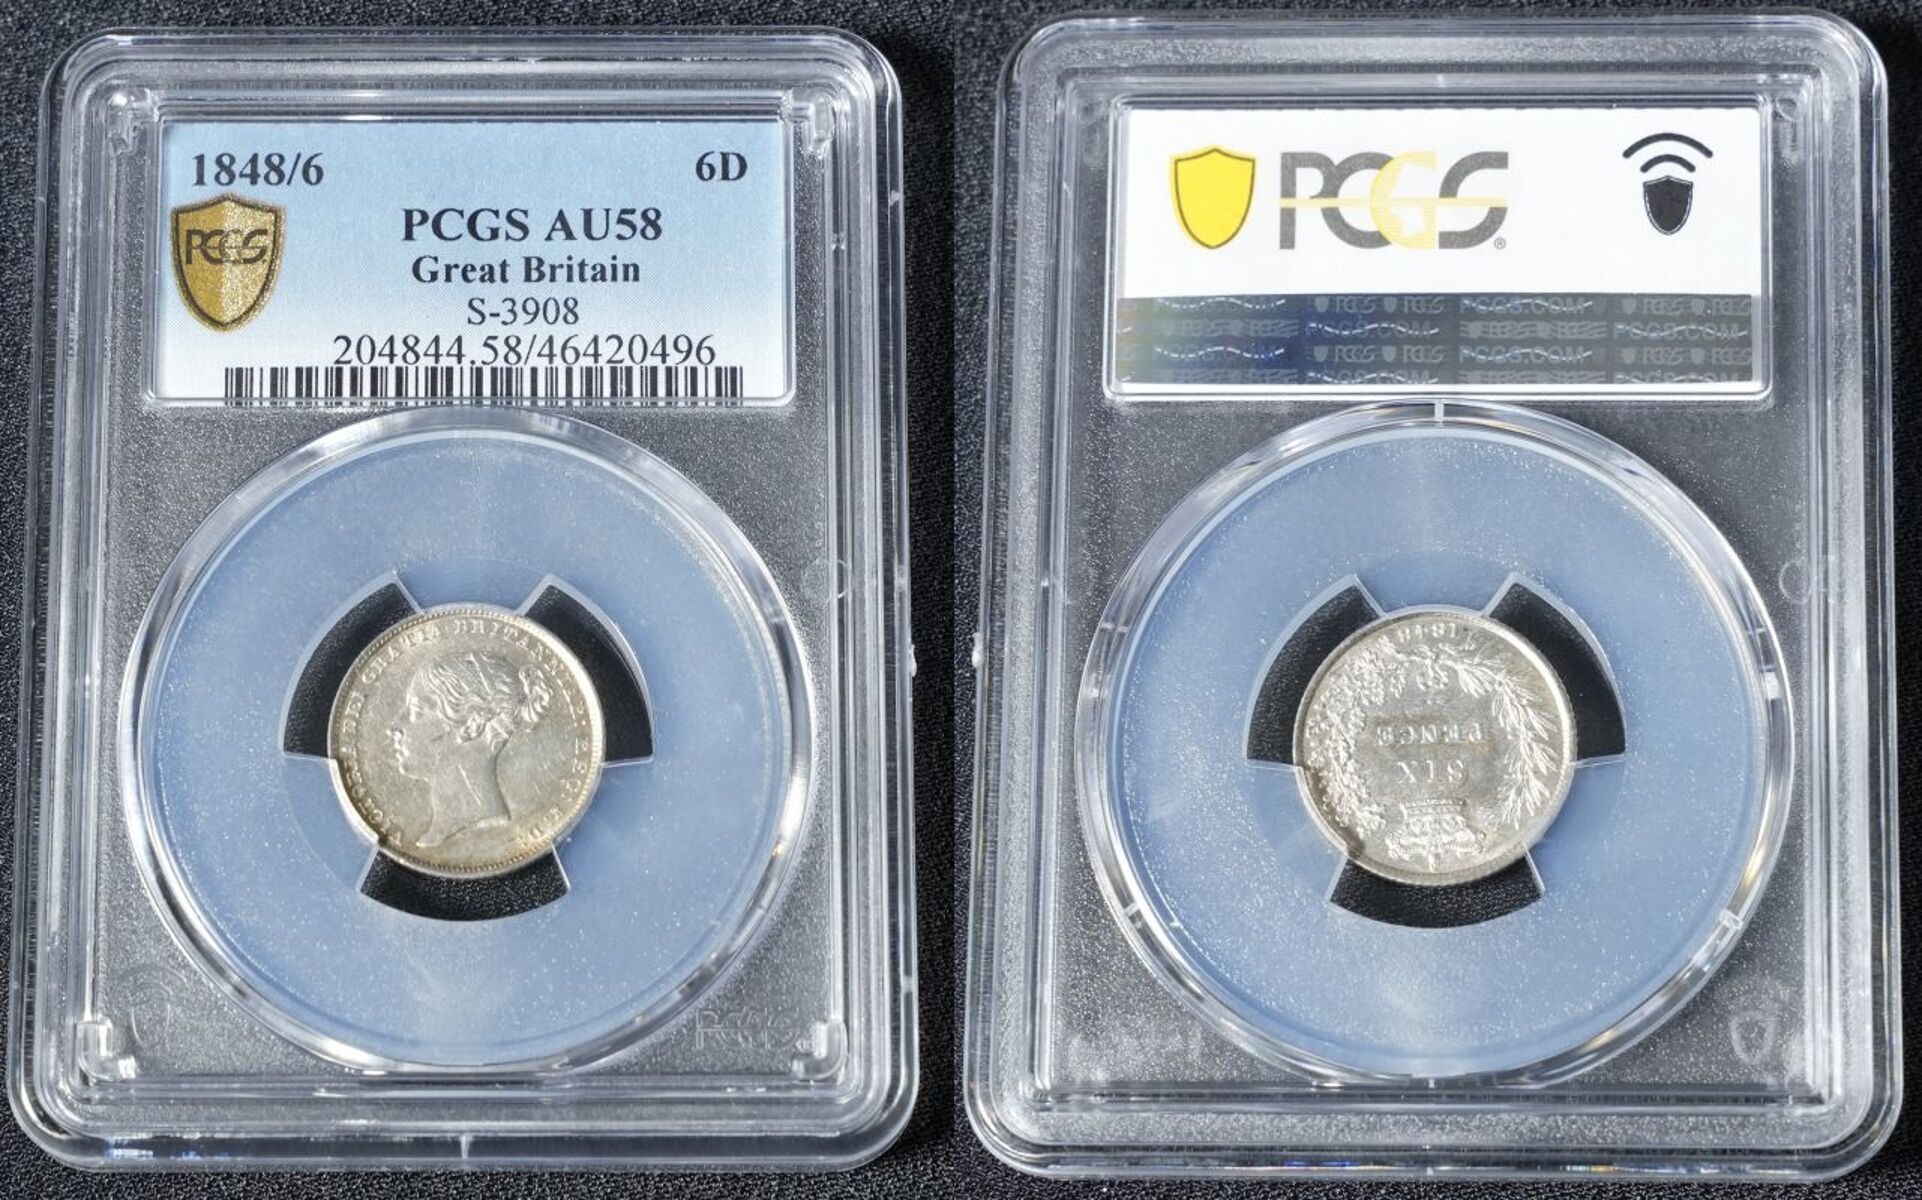 1848 Silver Sixpence Overdate 1848/6 PCGS AU58 - Image 4 of 7